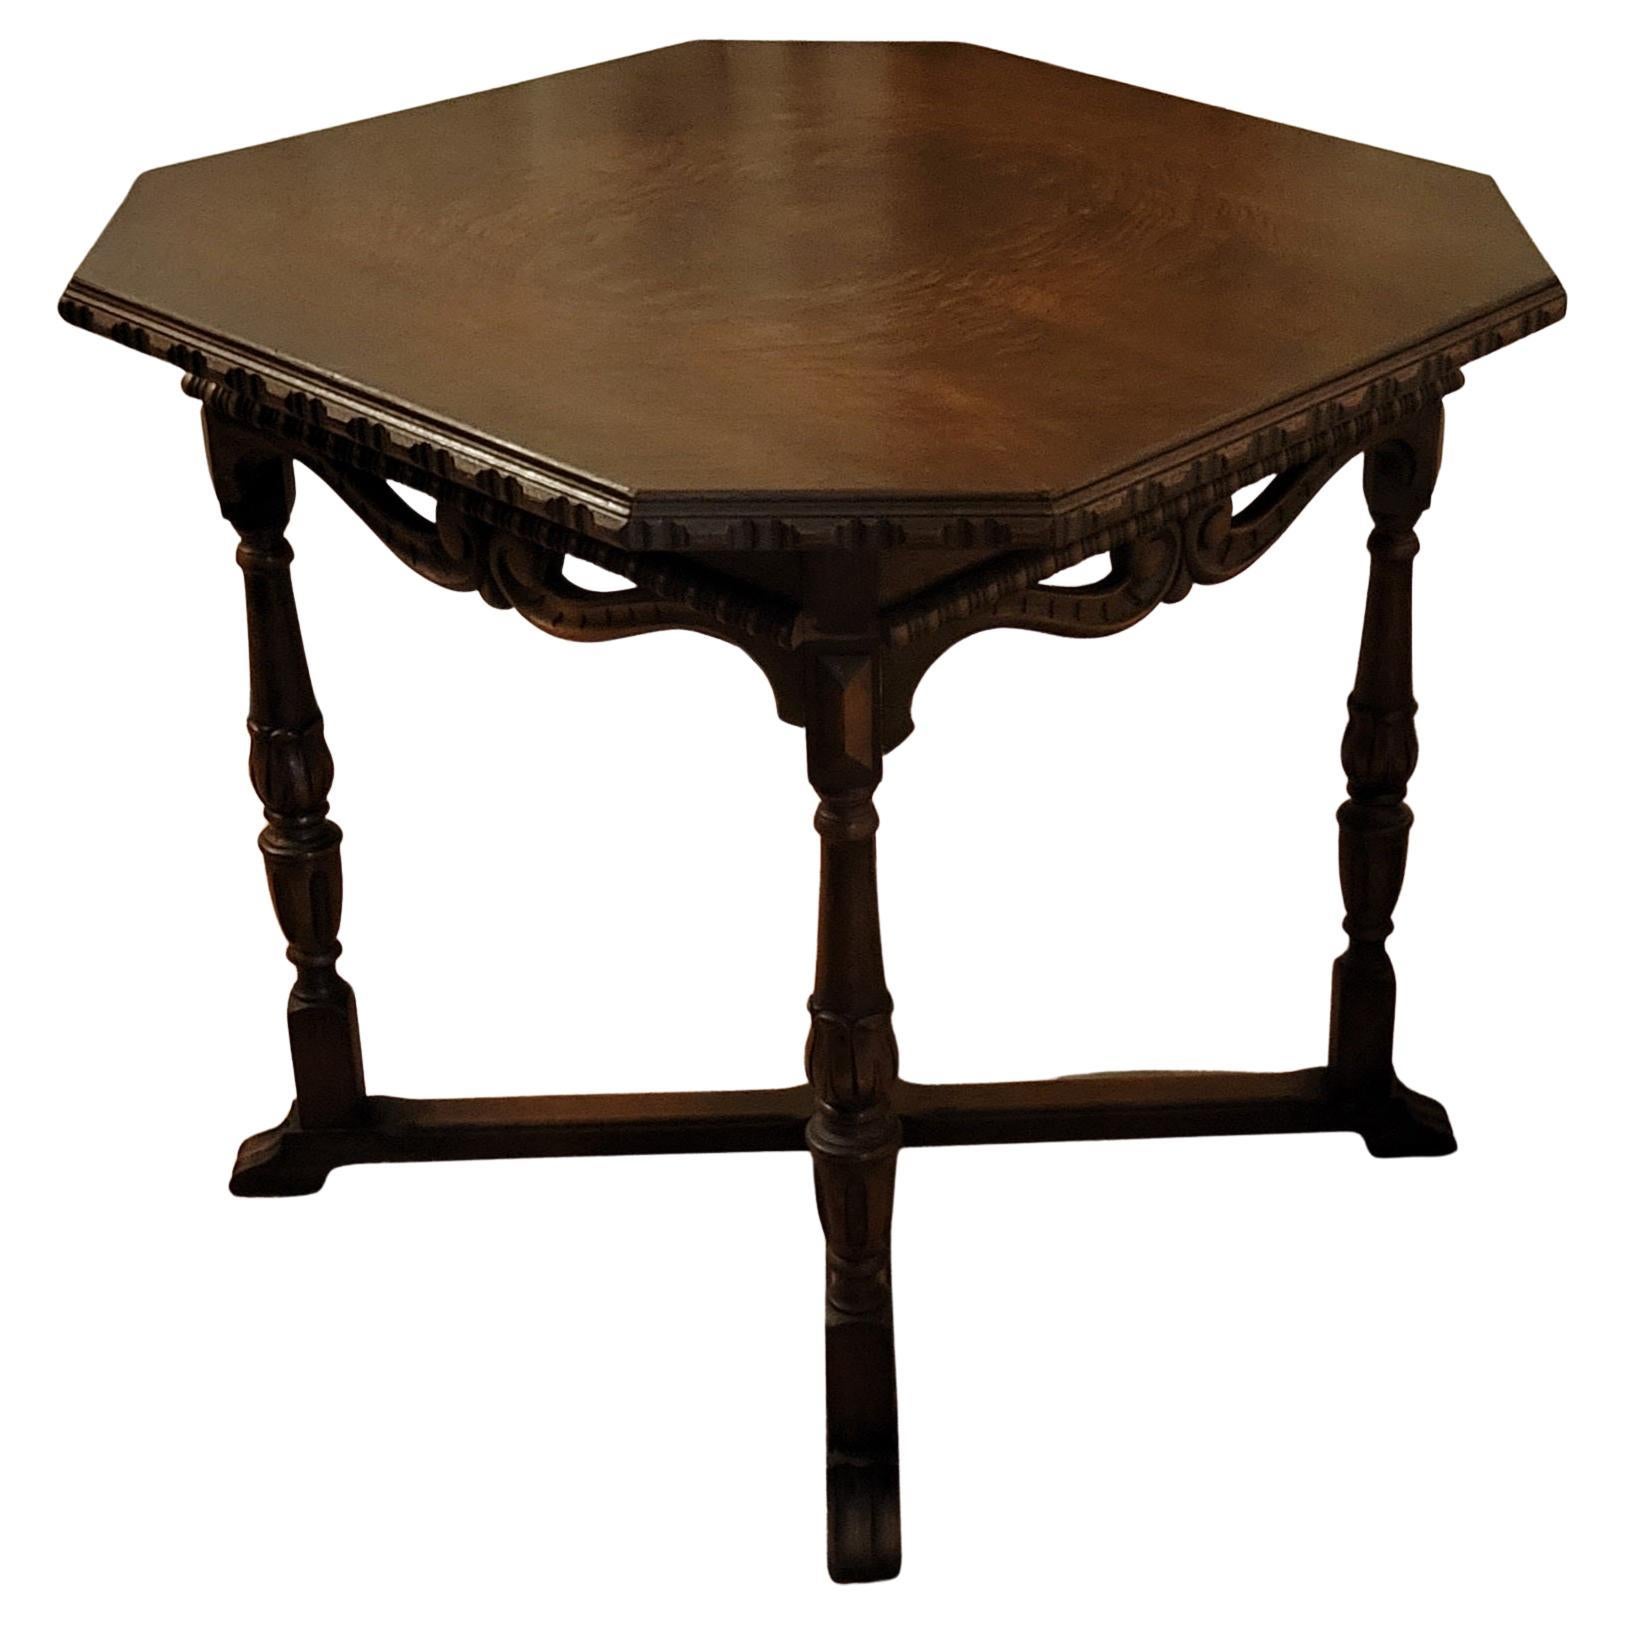 Antique, 1917, Solid Wood Octagonal Table 